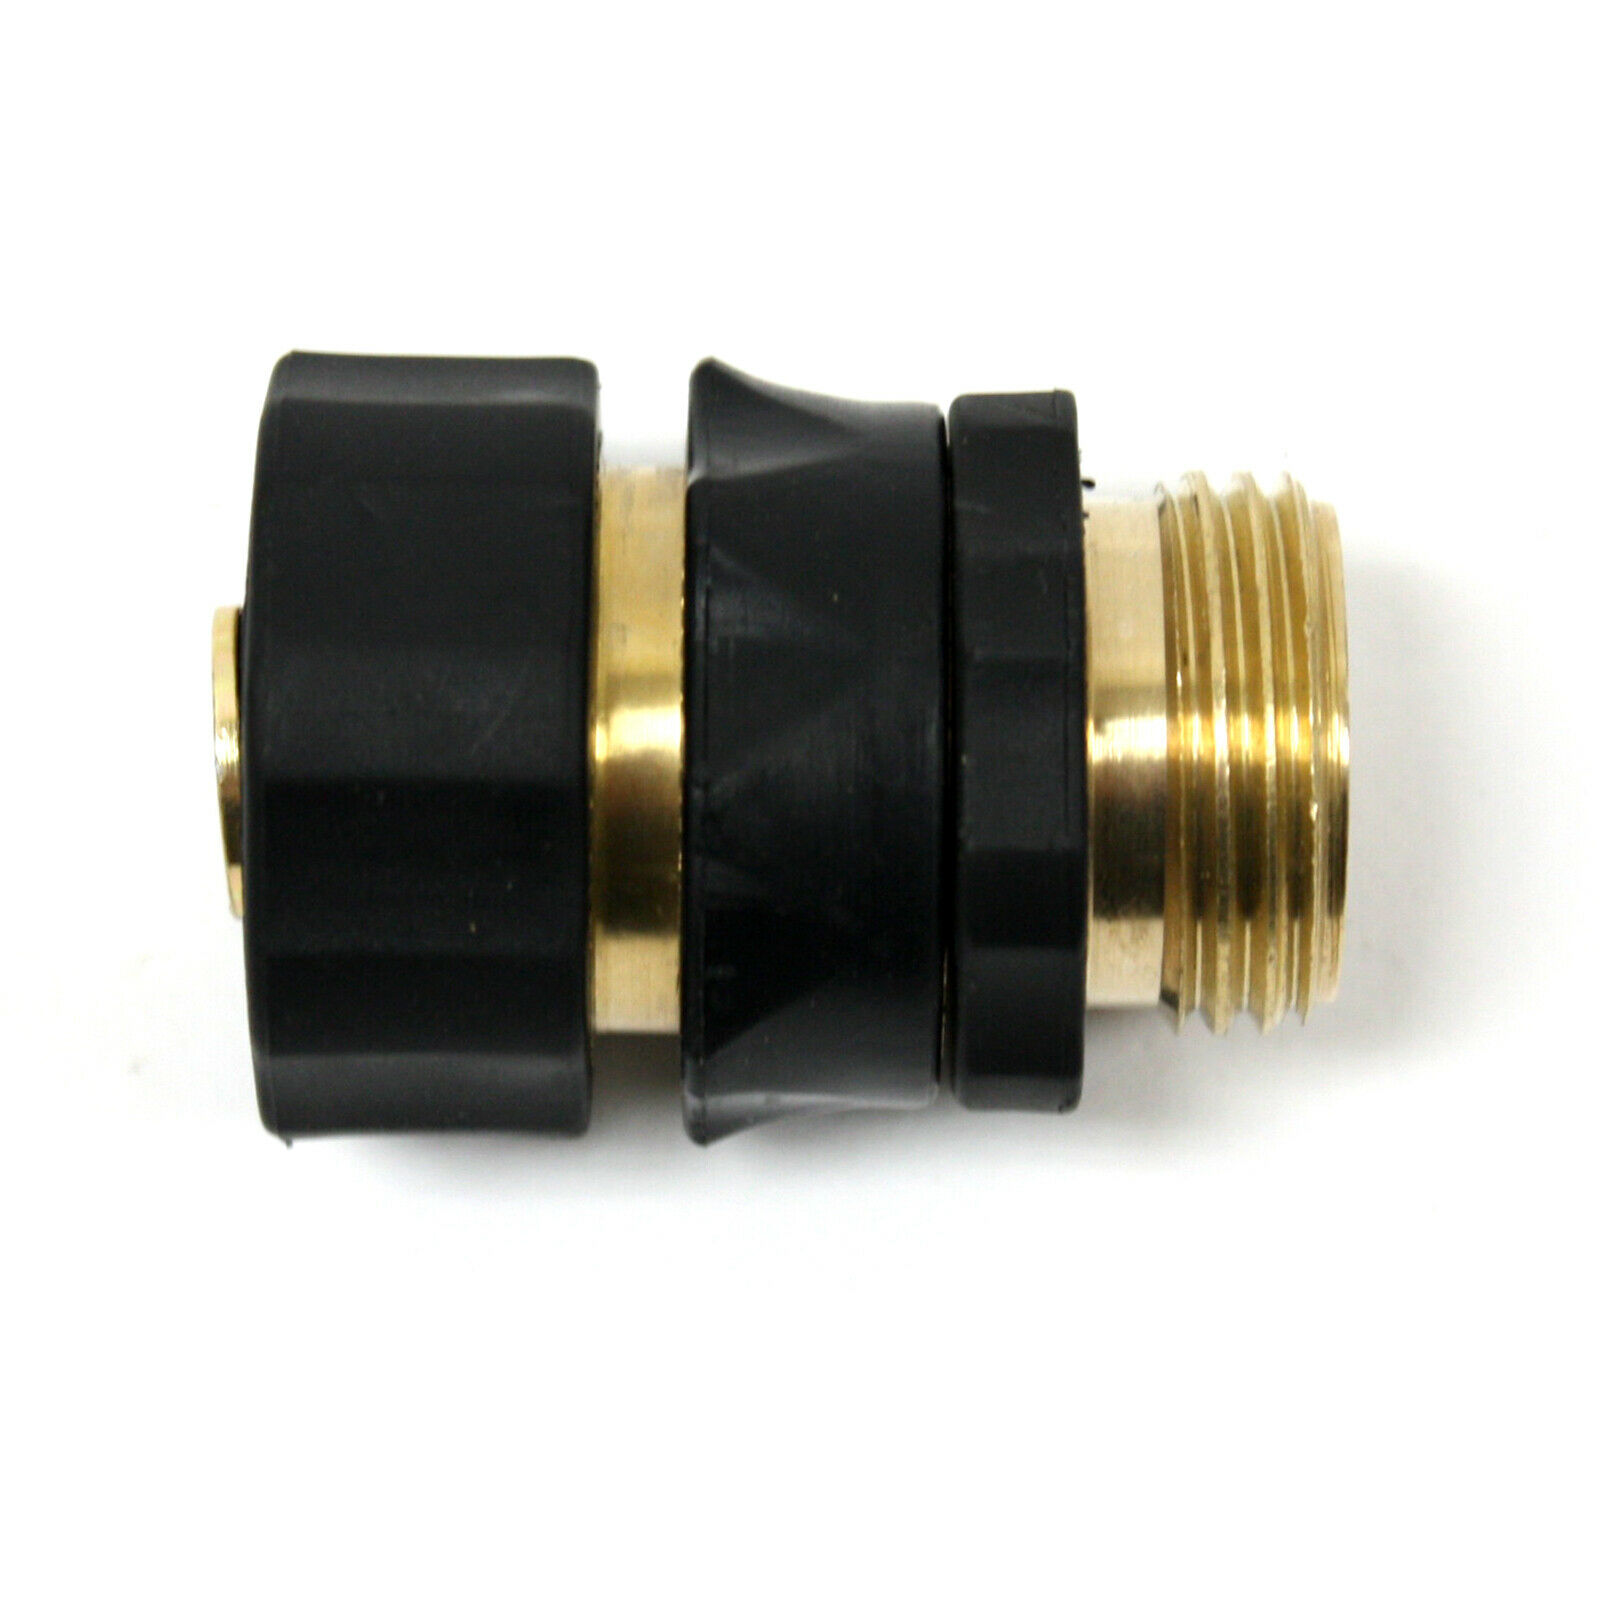 1 Pairs Garden Hose Quick Connector Set 3/4 Inch Brass Hose Tap Connect Fitting 